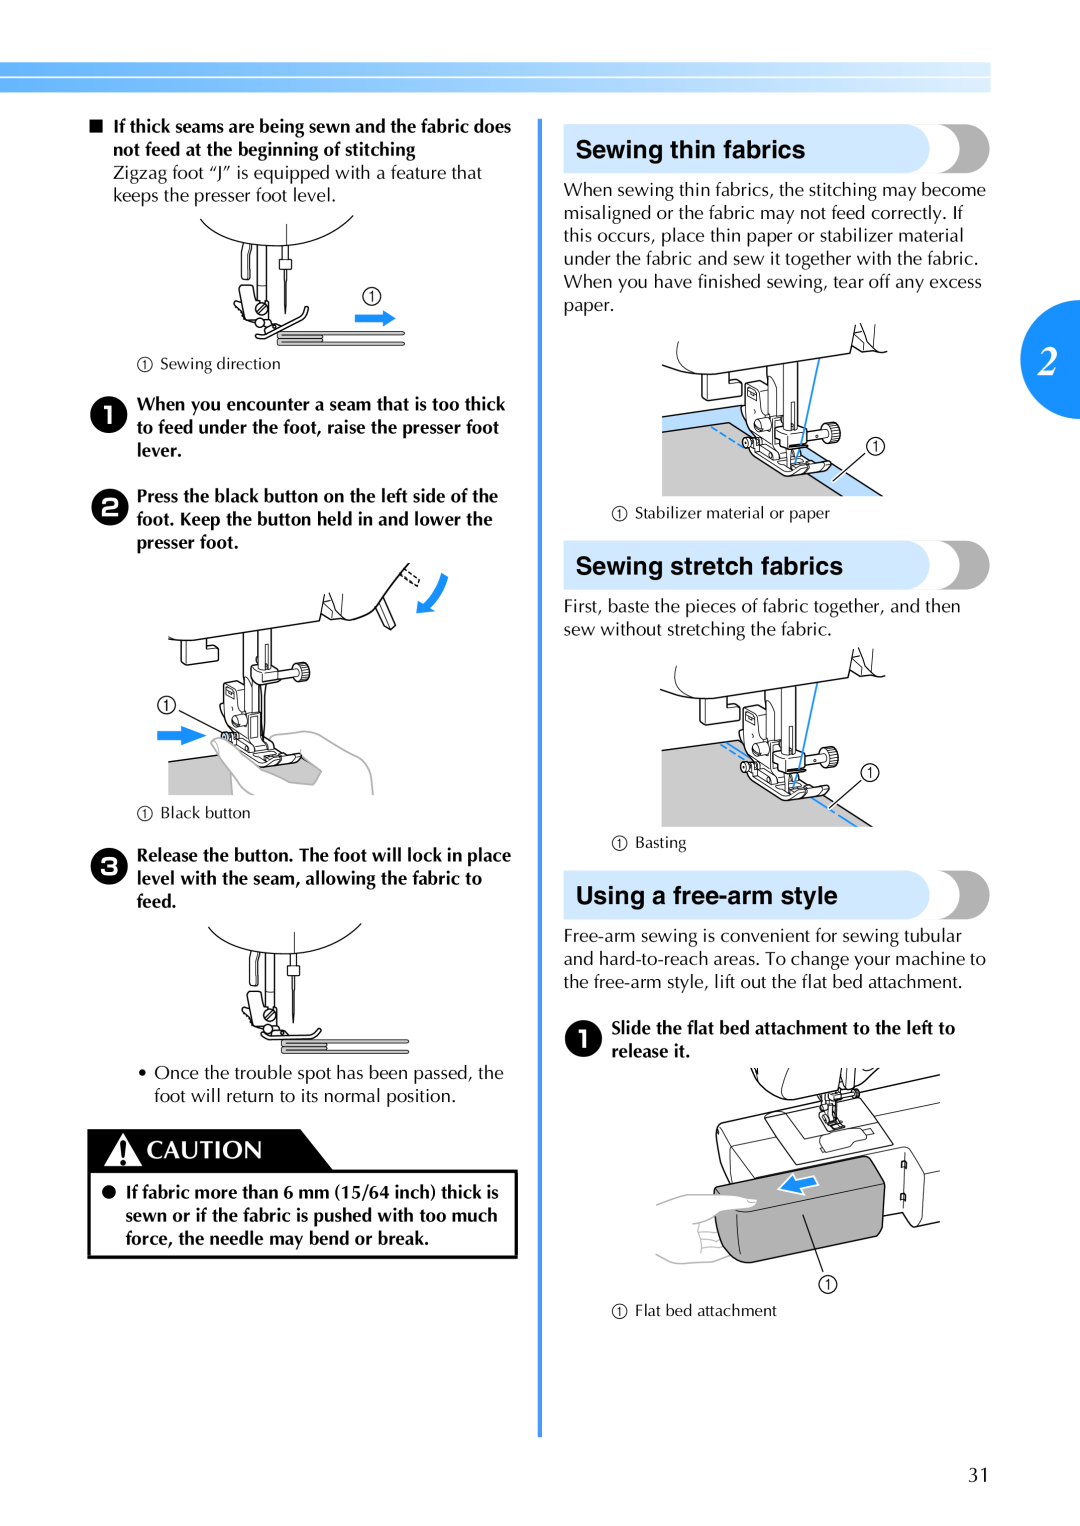 Brother CE 500PRW operation manual Sewing thin fabrics, Sewing stretch fabrics, Using a free-arm style 